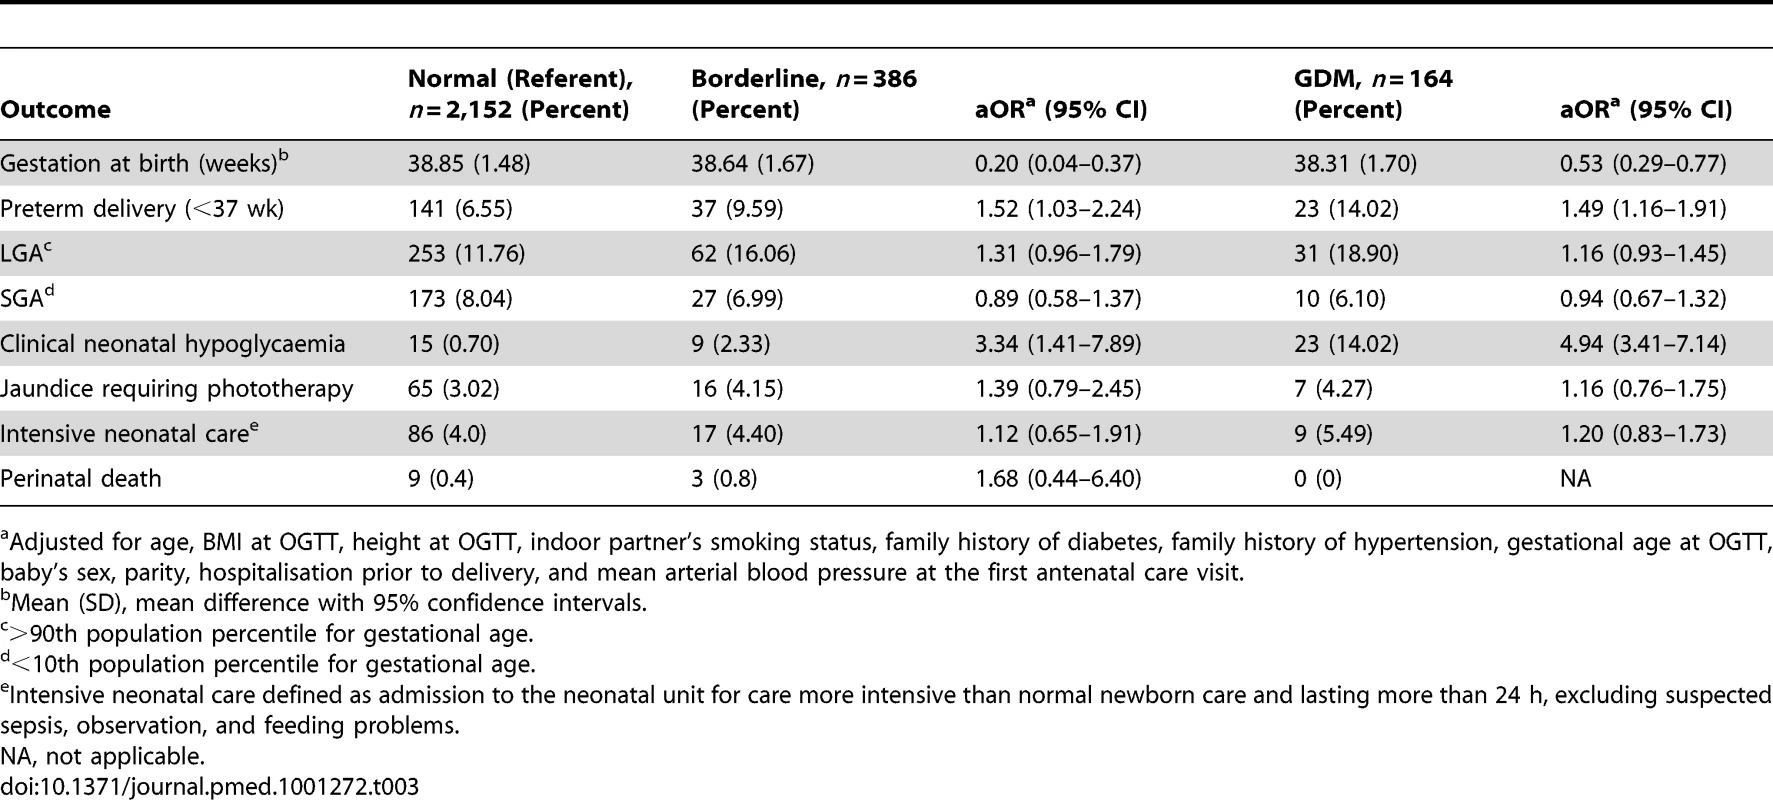 Neonatal outcomes comparing referent group to borderline and GDM groups.